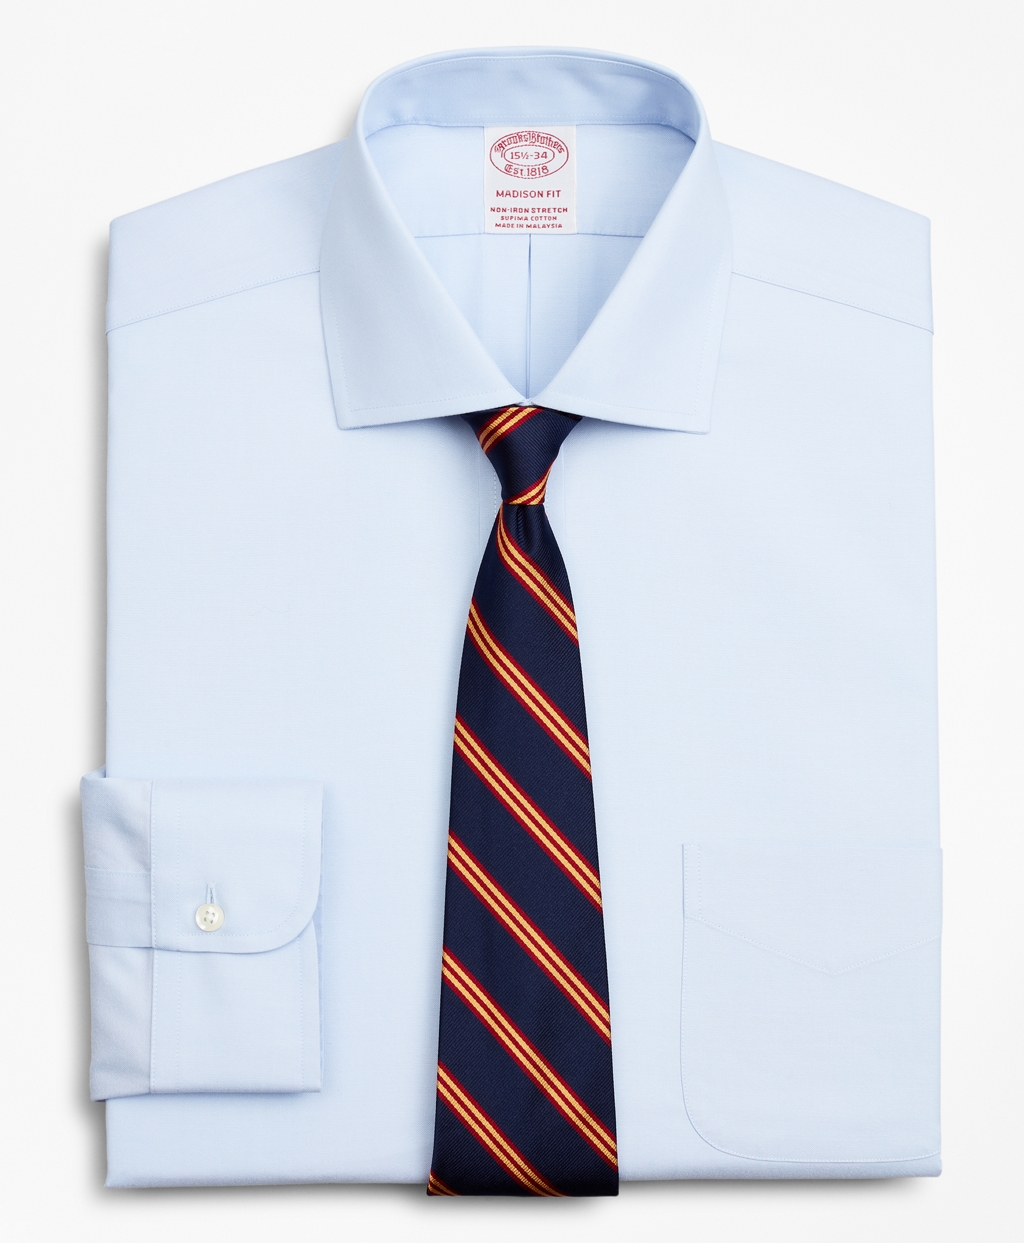 Brooksbrothers Stretch Madison Relaxed-Fit Dress Shirt, Non-Iron Pinpoint English Collar